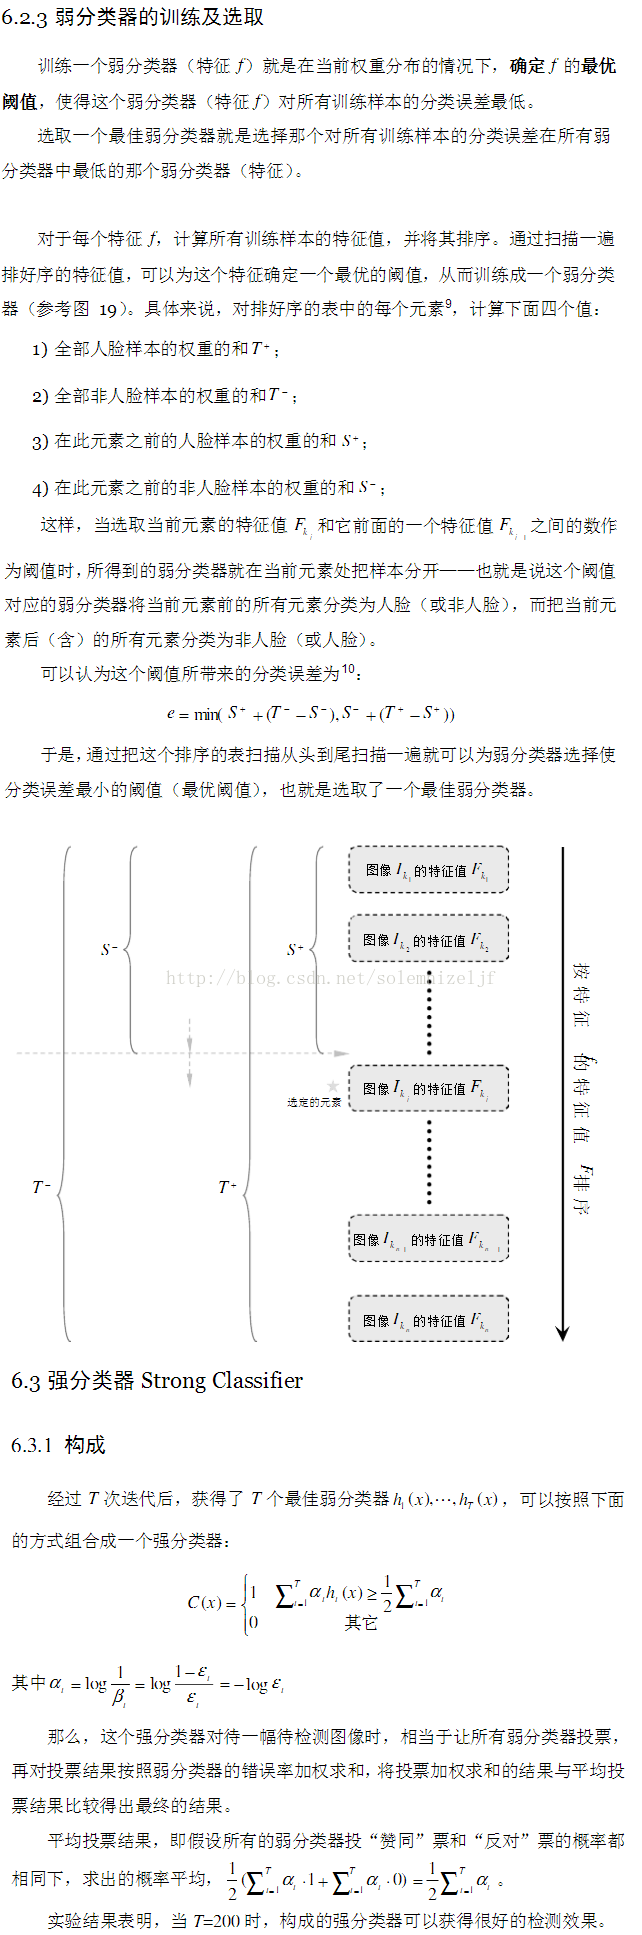 2001 Rapid object detection using a boosted cascade of simple features(Paul Viola et al)读后感